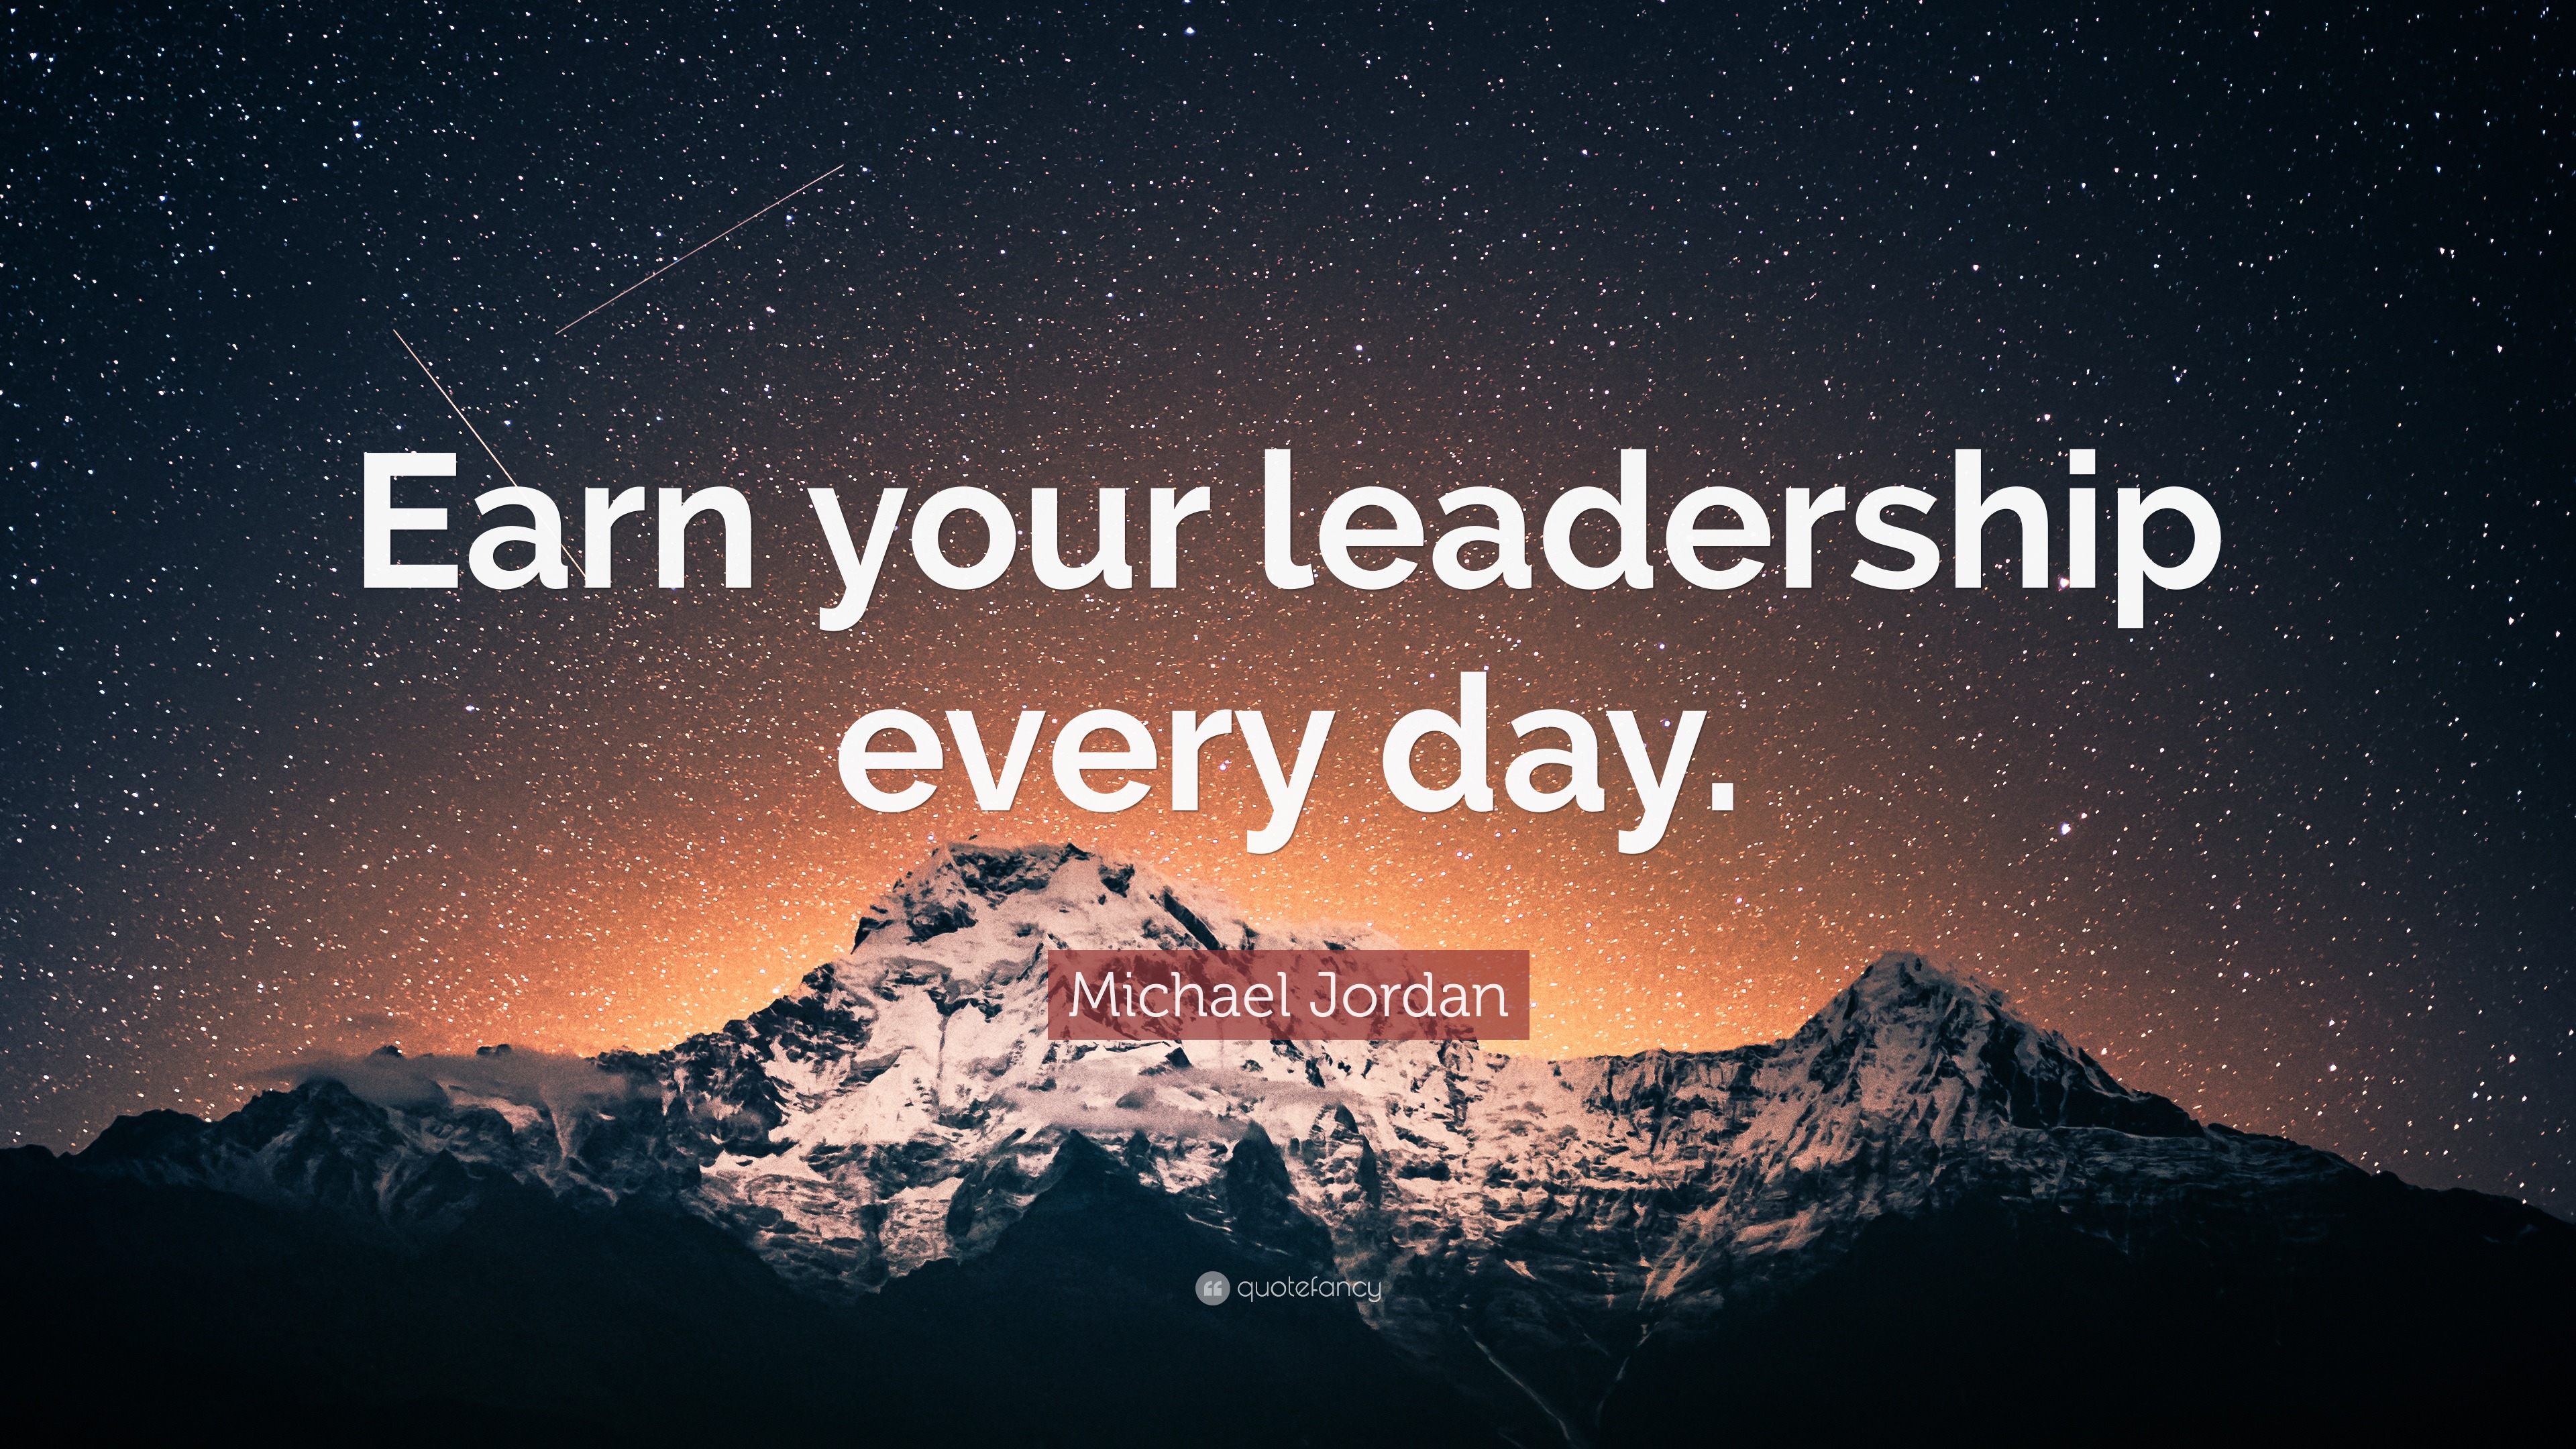 Michael Jordan Quote: “Earn your leadership every day.” (23 wallpapers